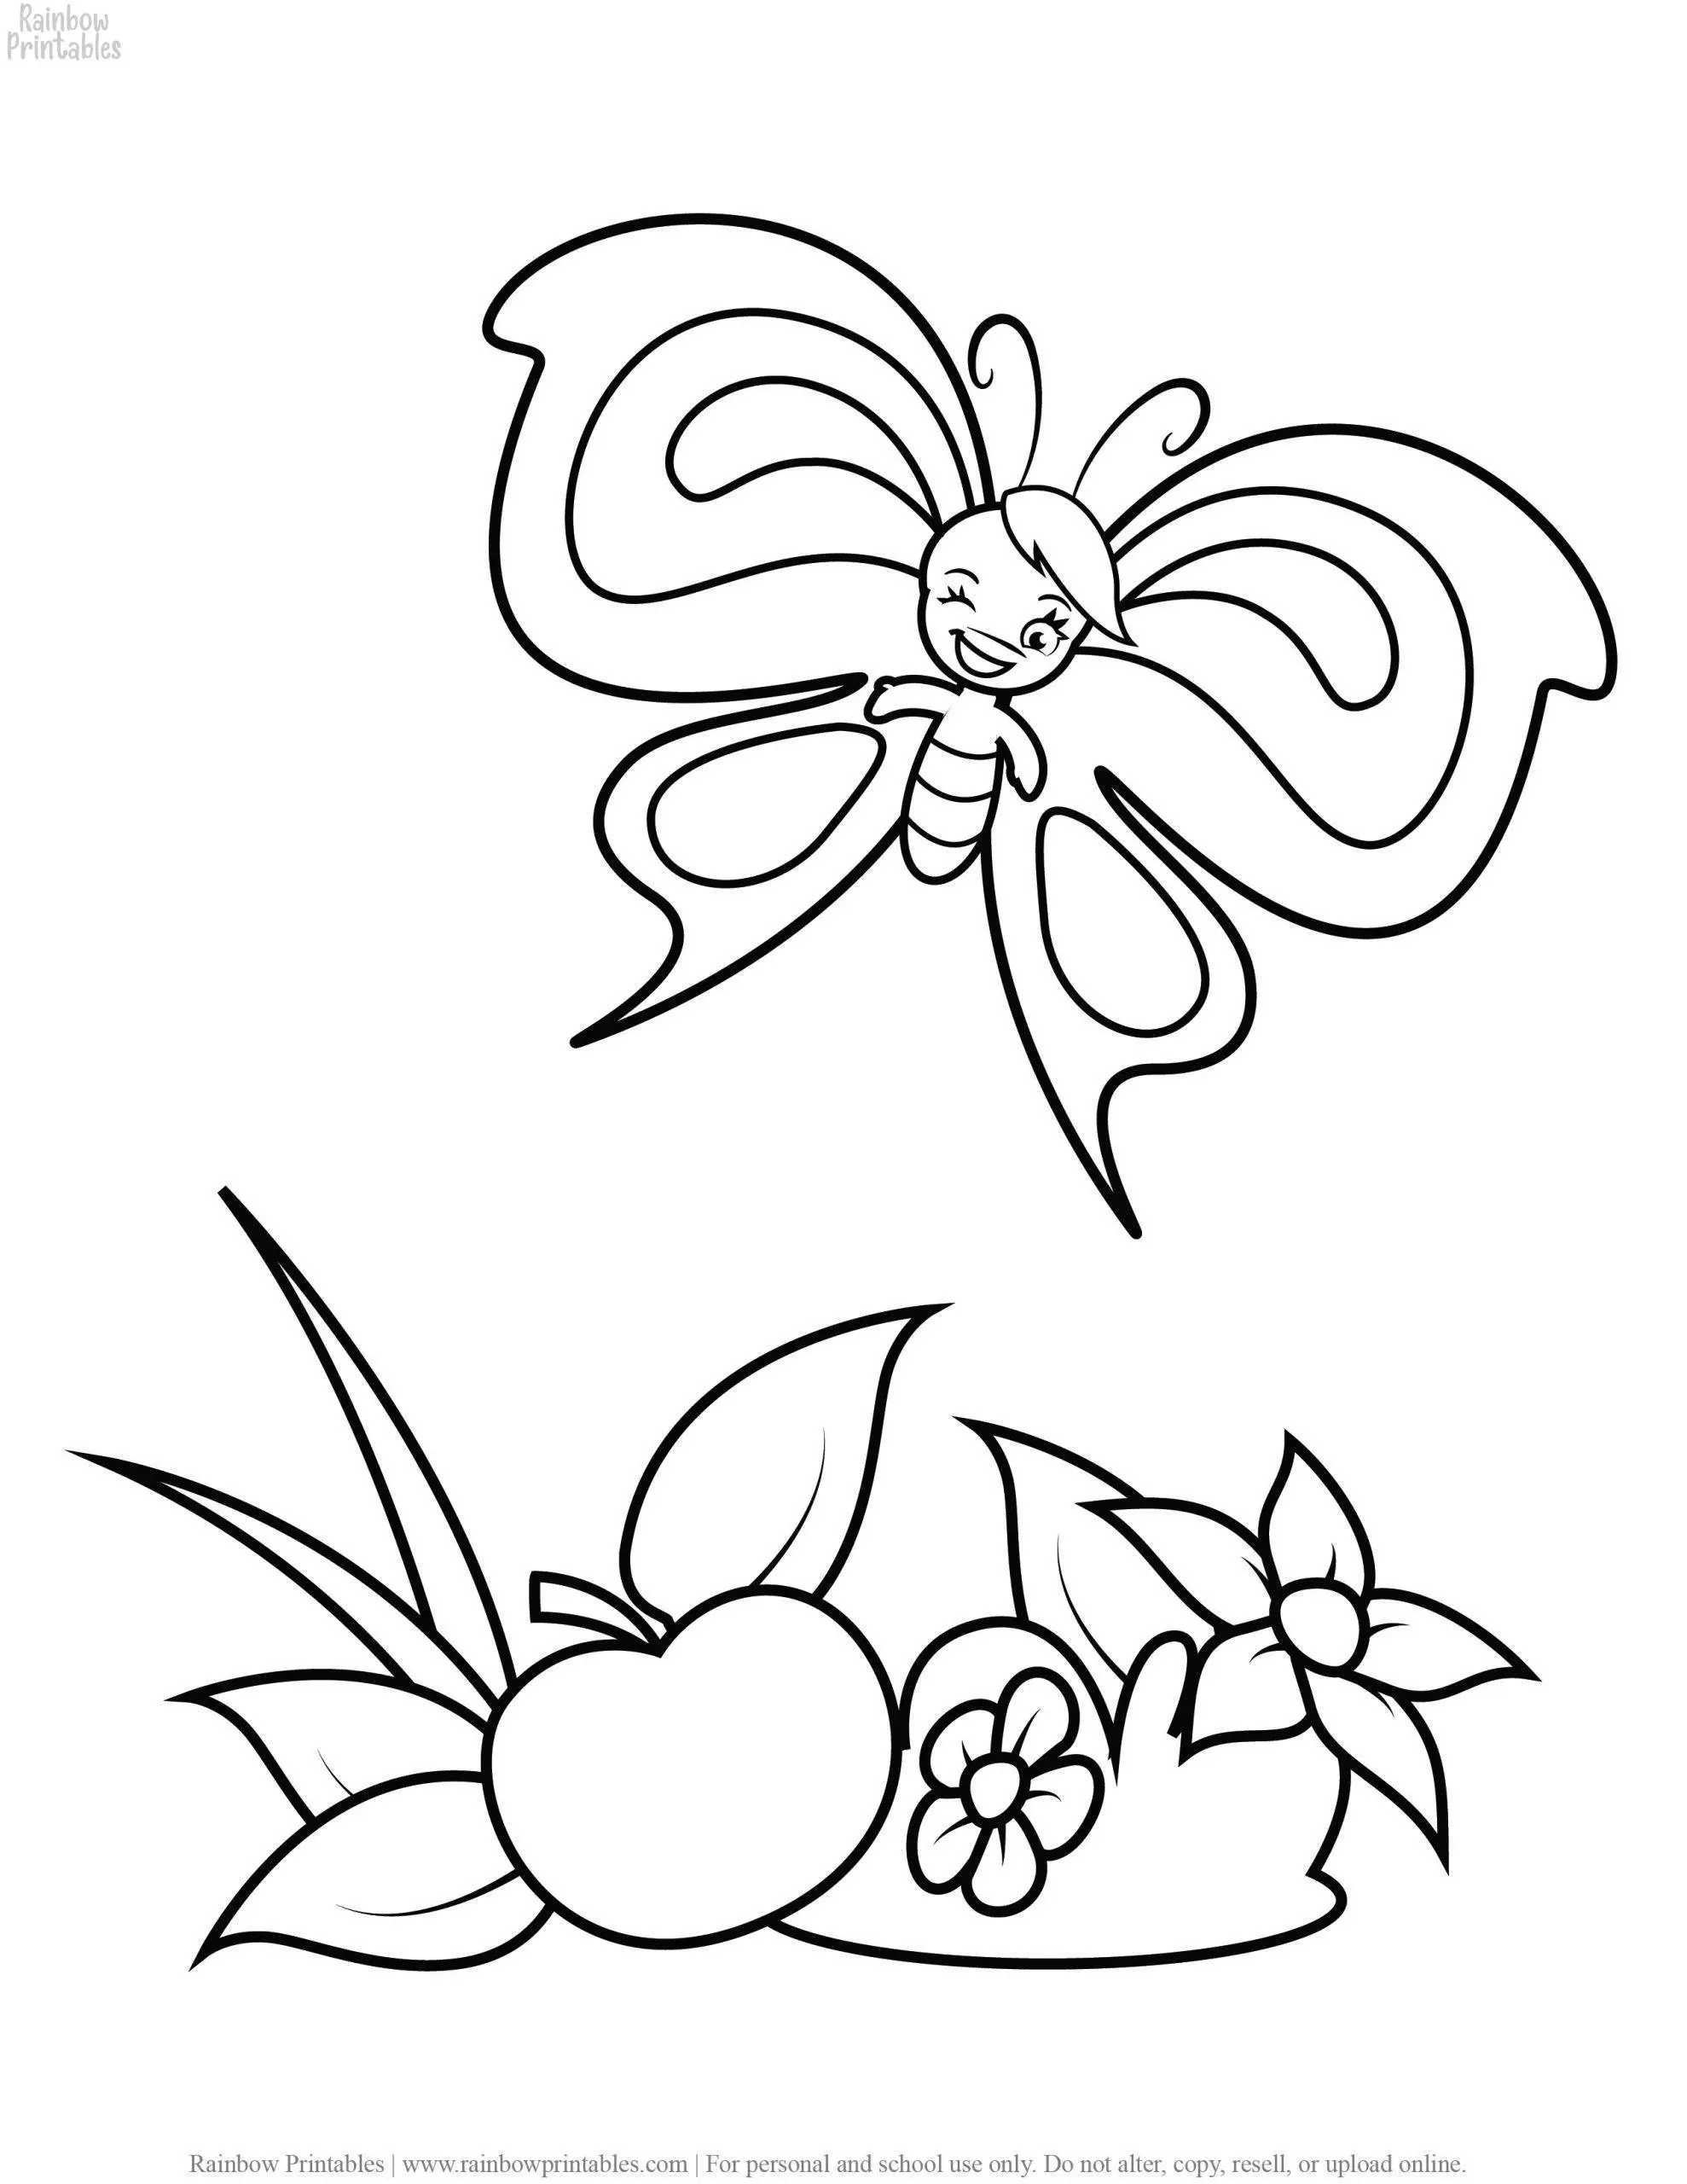 Easy Spring Time FLOWER and Butterfly Animal Insect Coloring Pages for Kids Printable Art Activity for Children